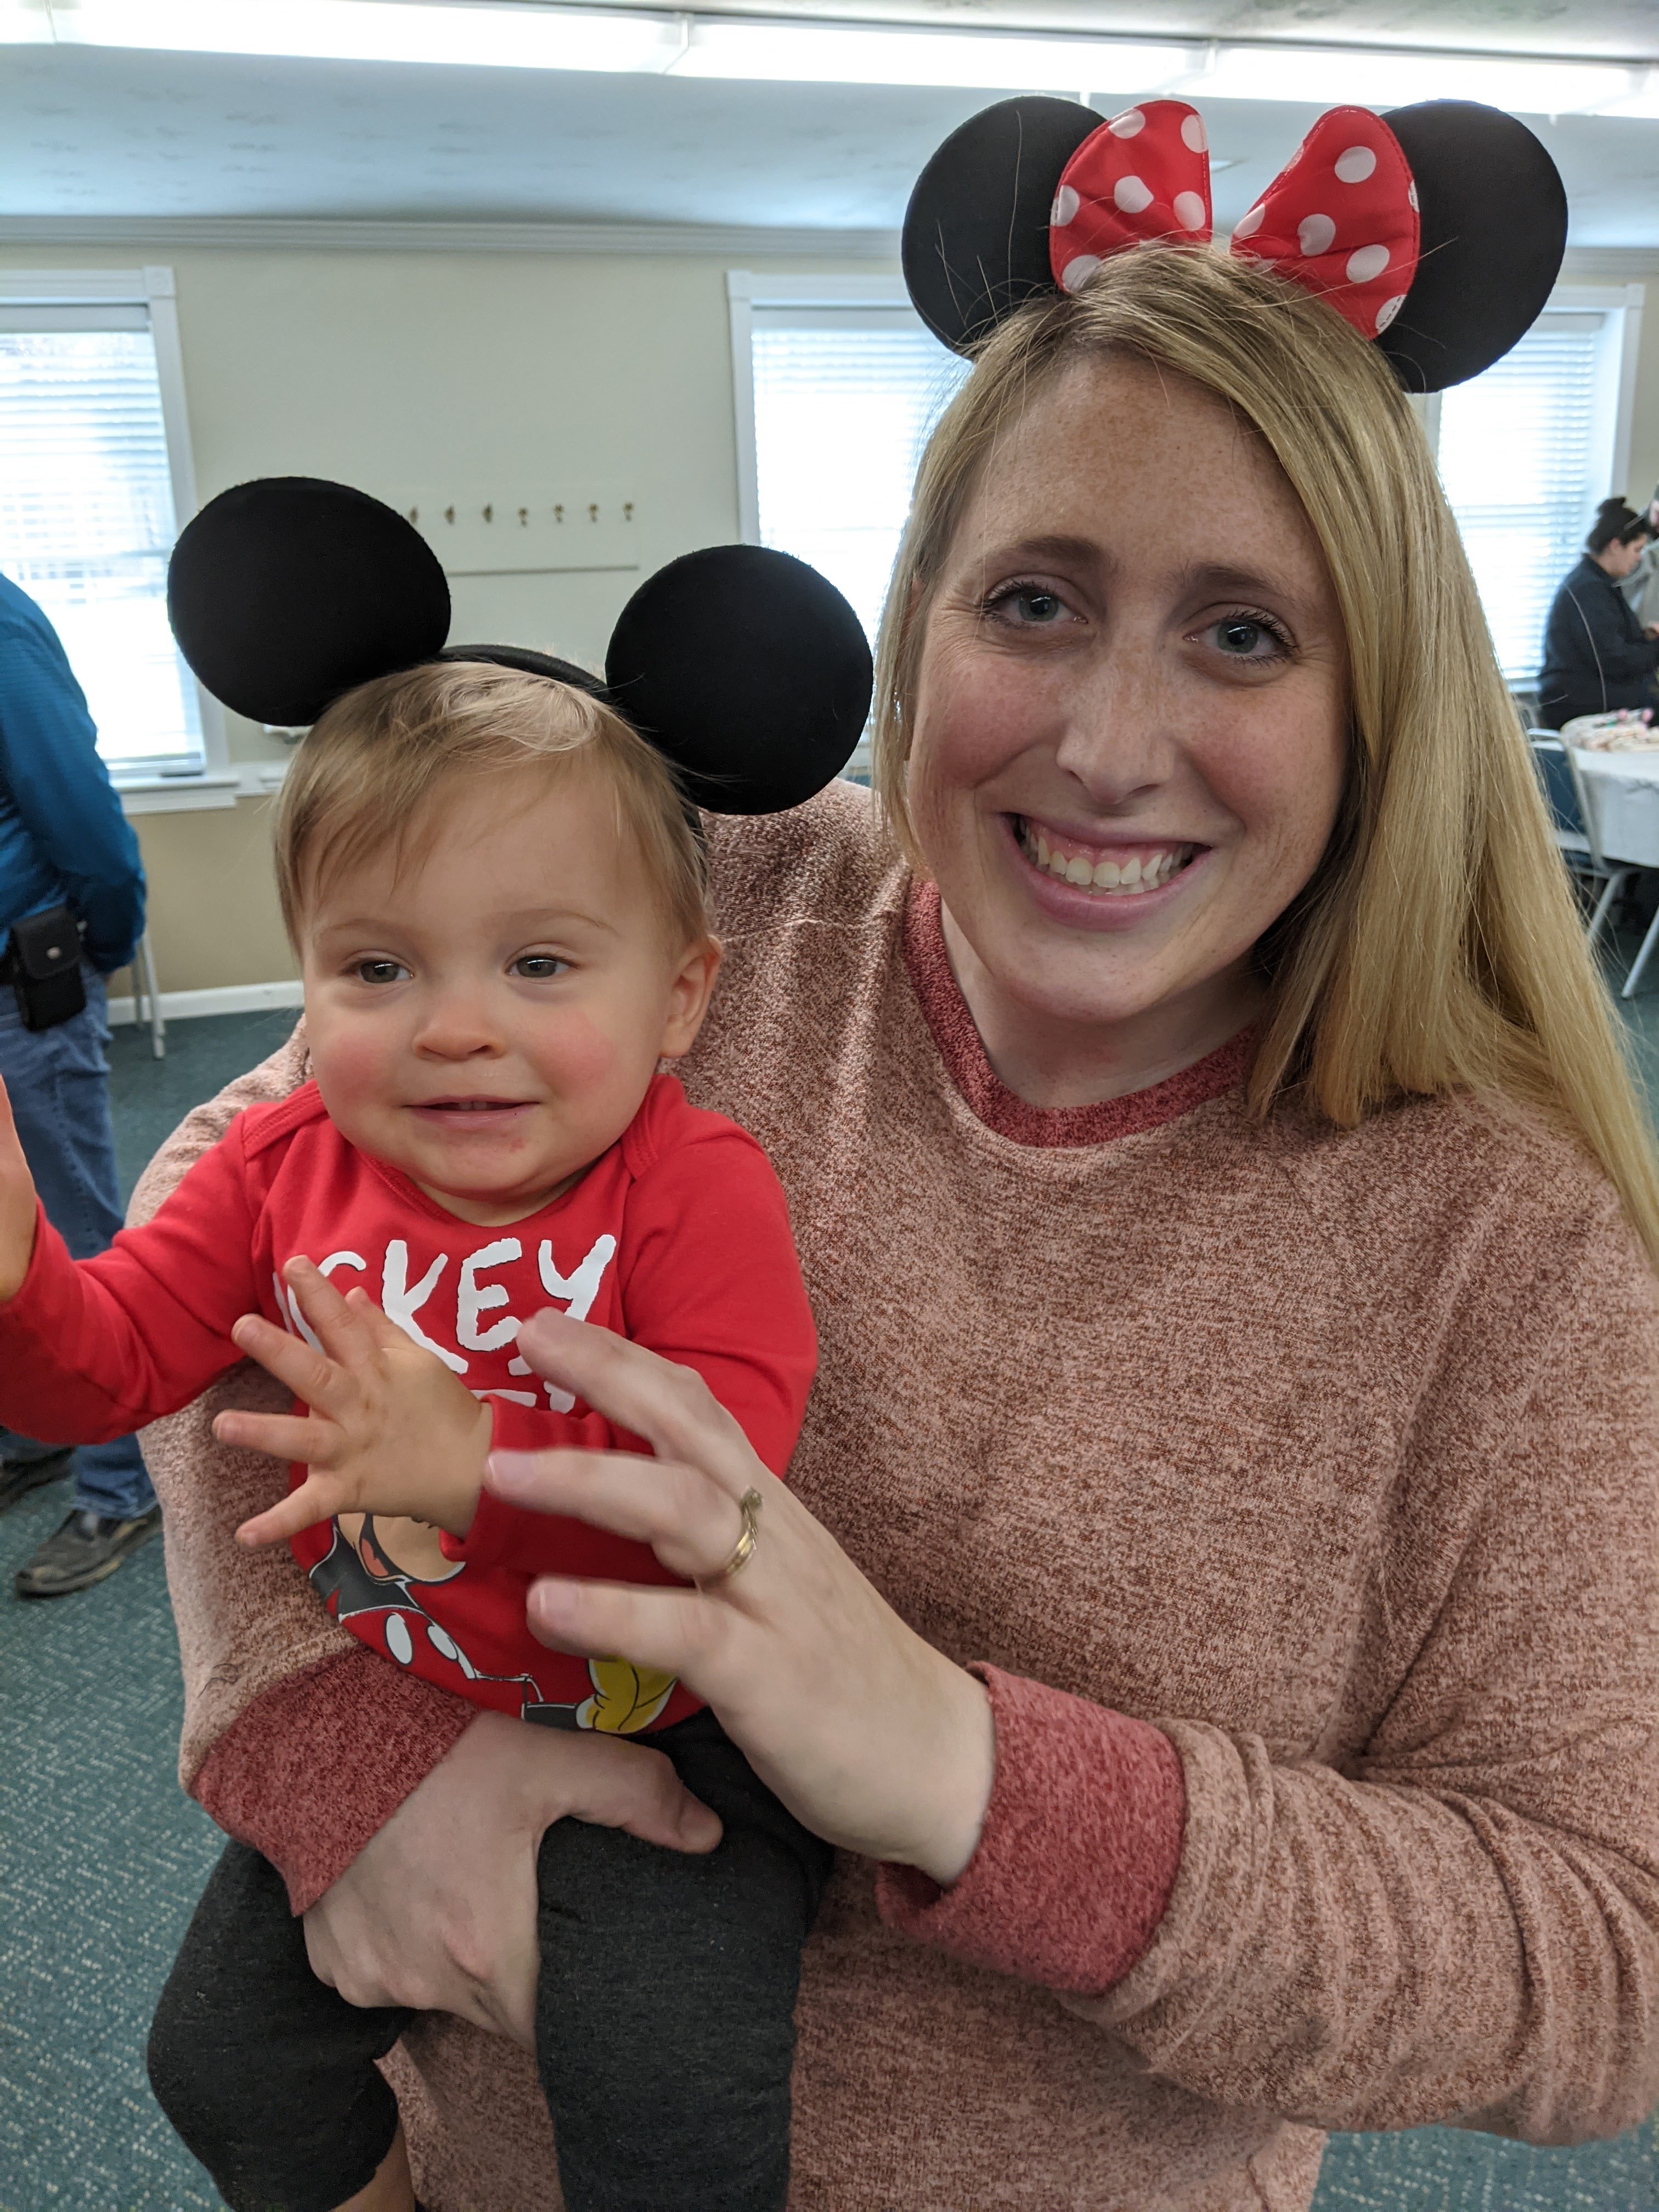 Noah's first birthday party was so much fun! He loves Mickey!